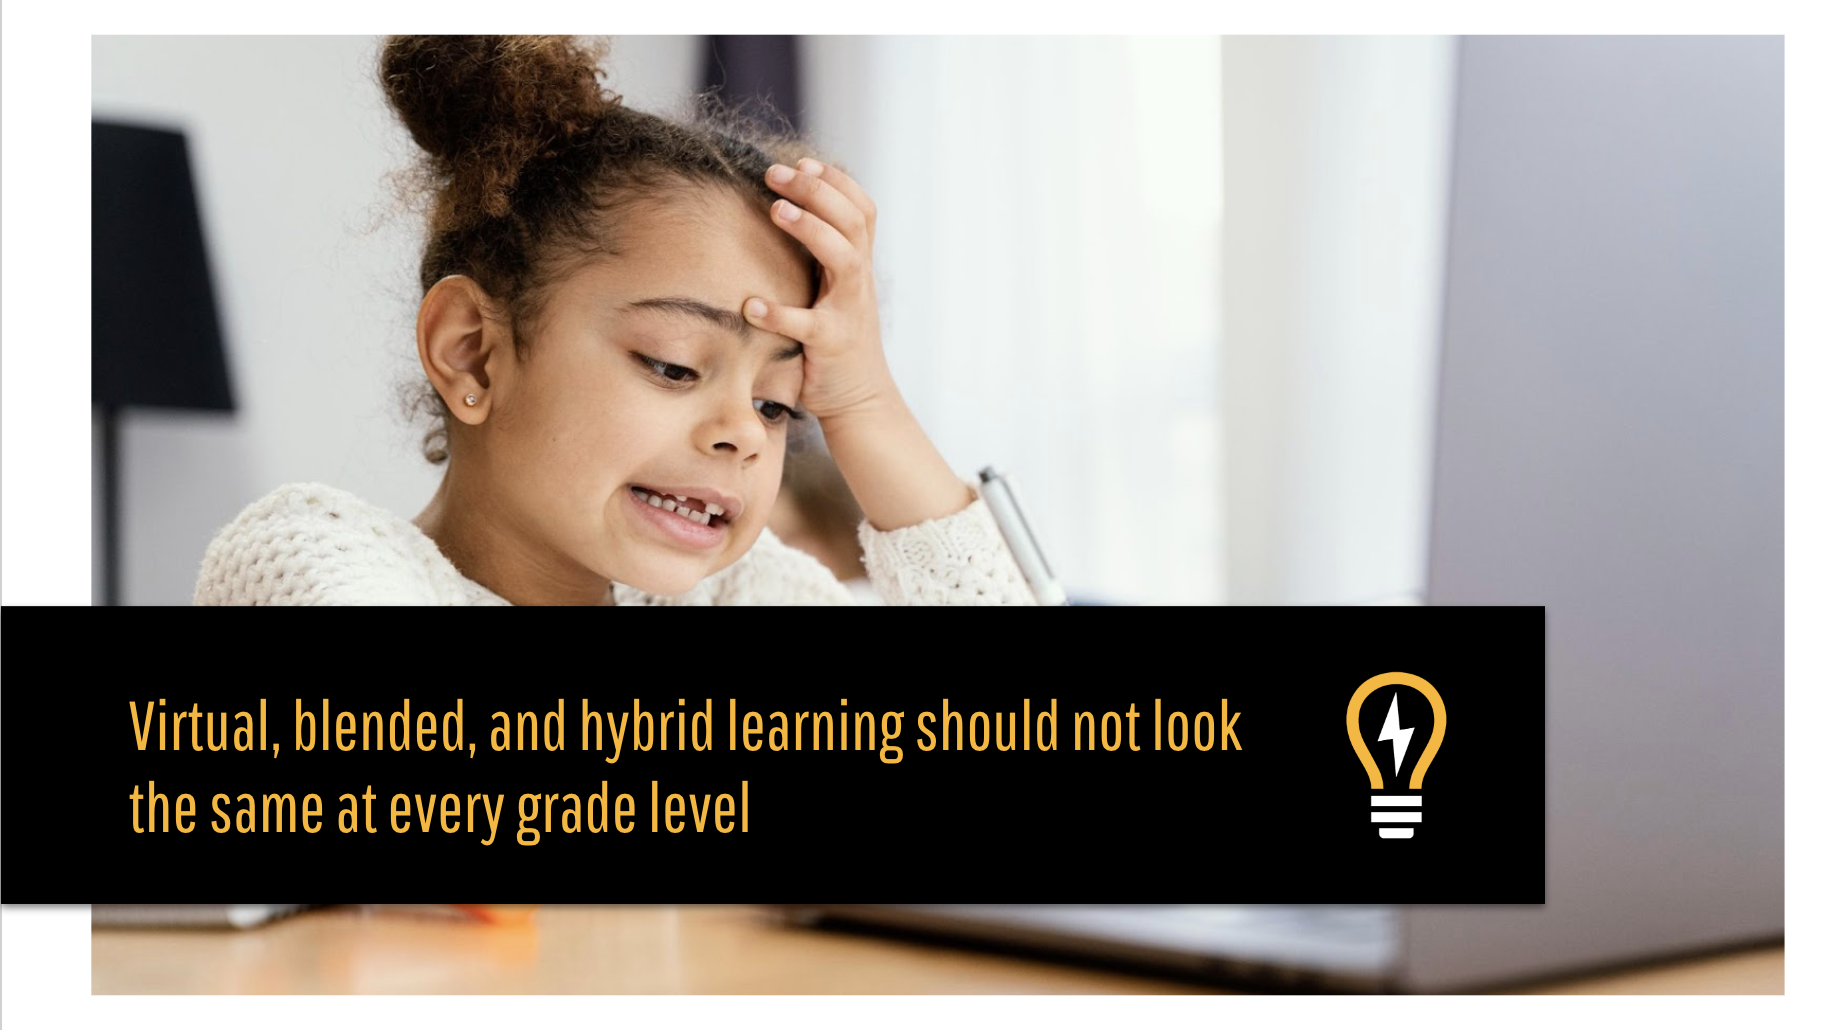 Image with title: virtual, hybrid, and blended learning should not look the same at every grade level